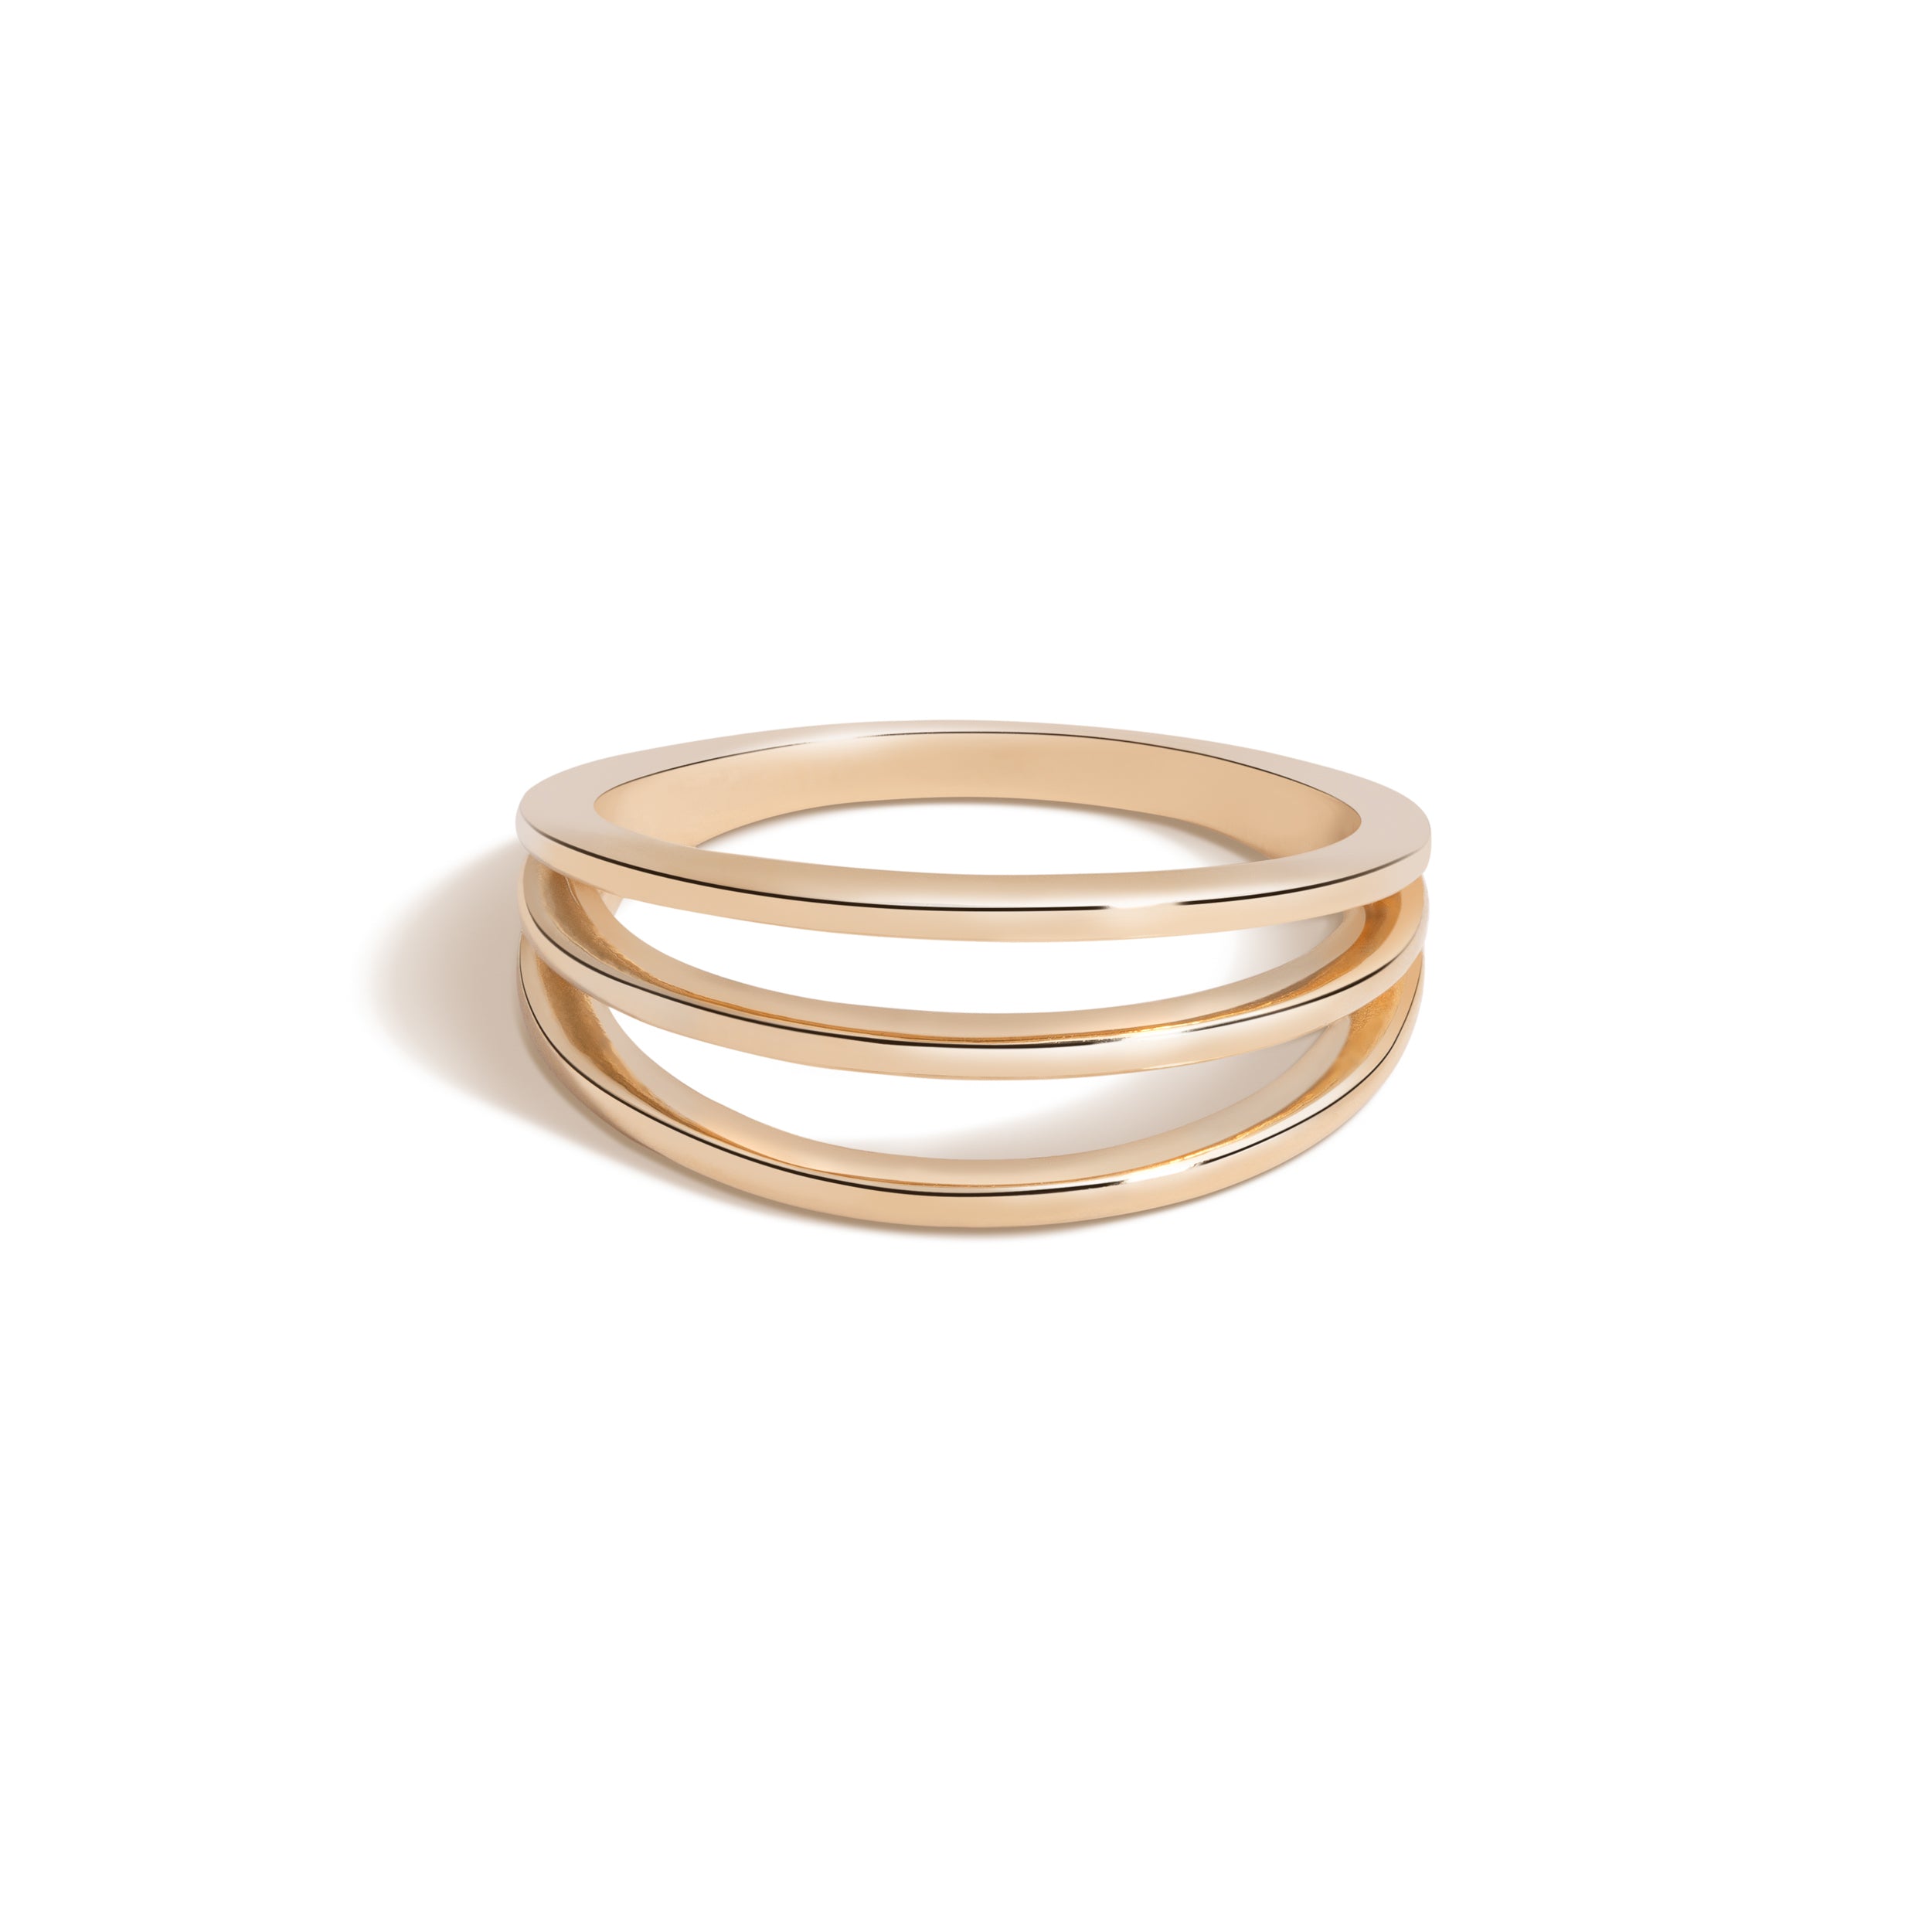 Shahla Karimi Negative Spaces Yellow Gold Ring